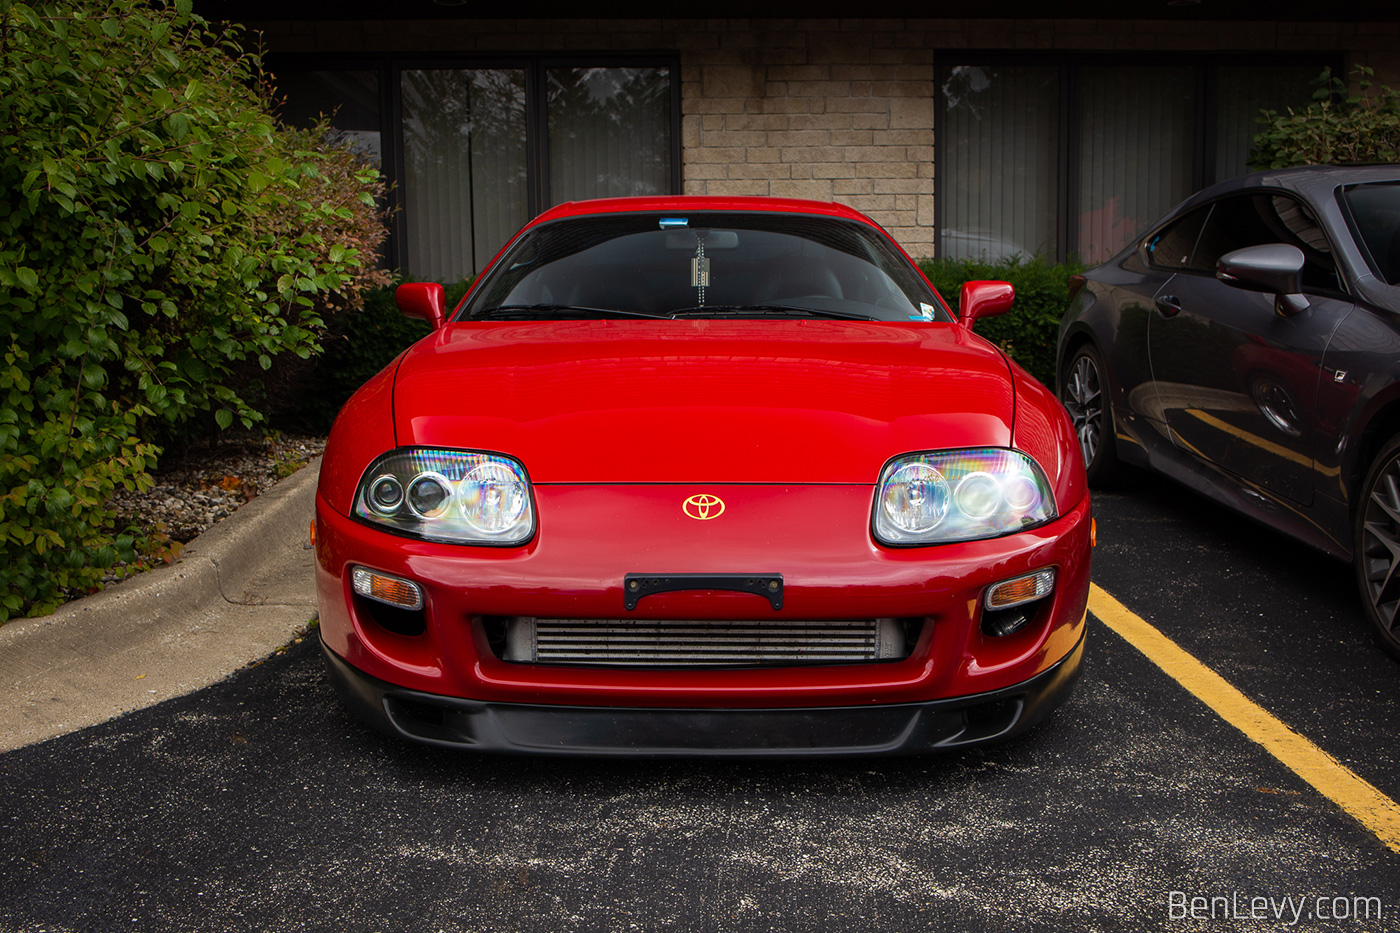 Front of Red Toyota Supra